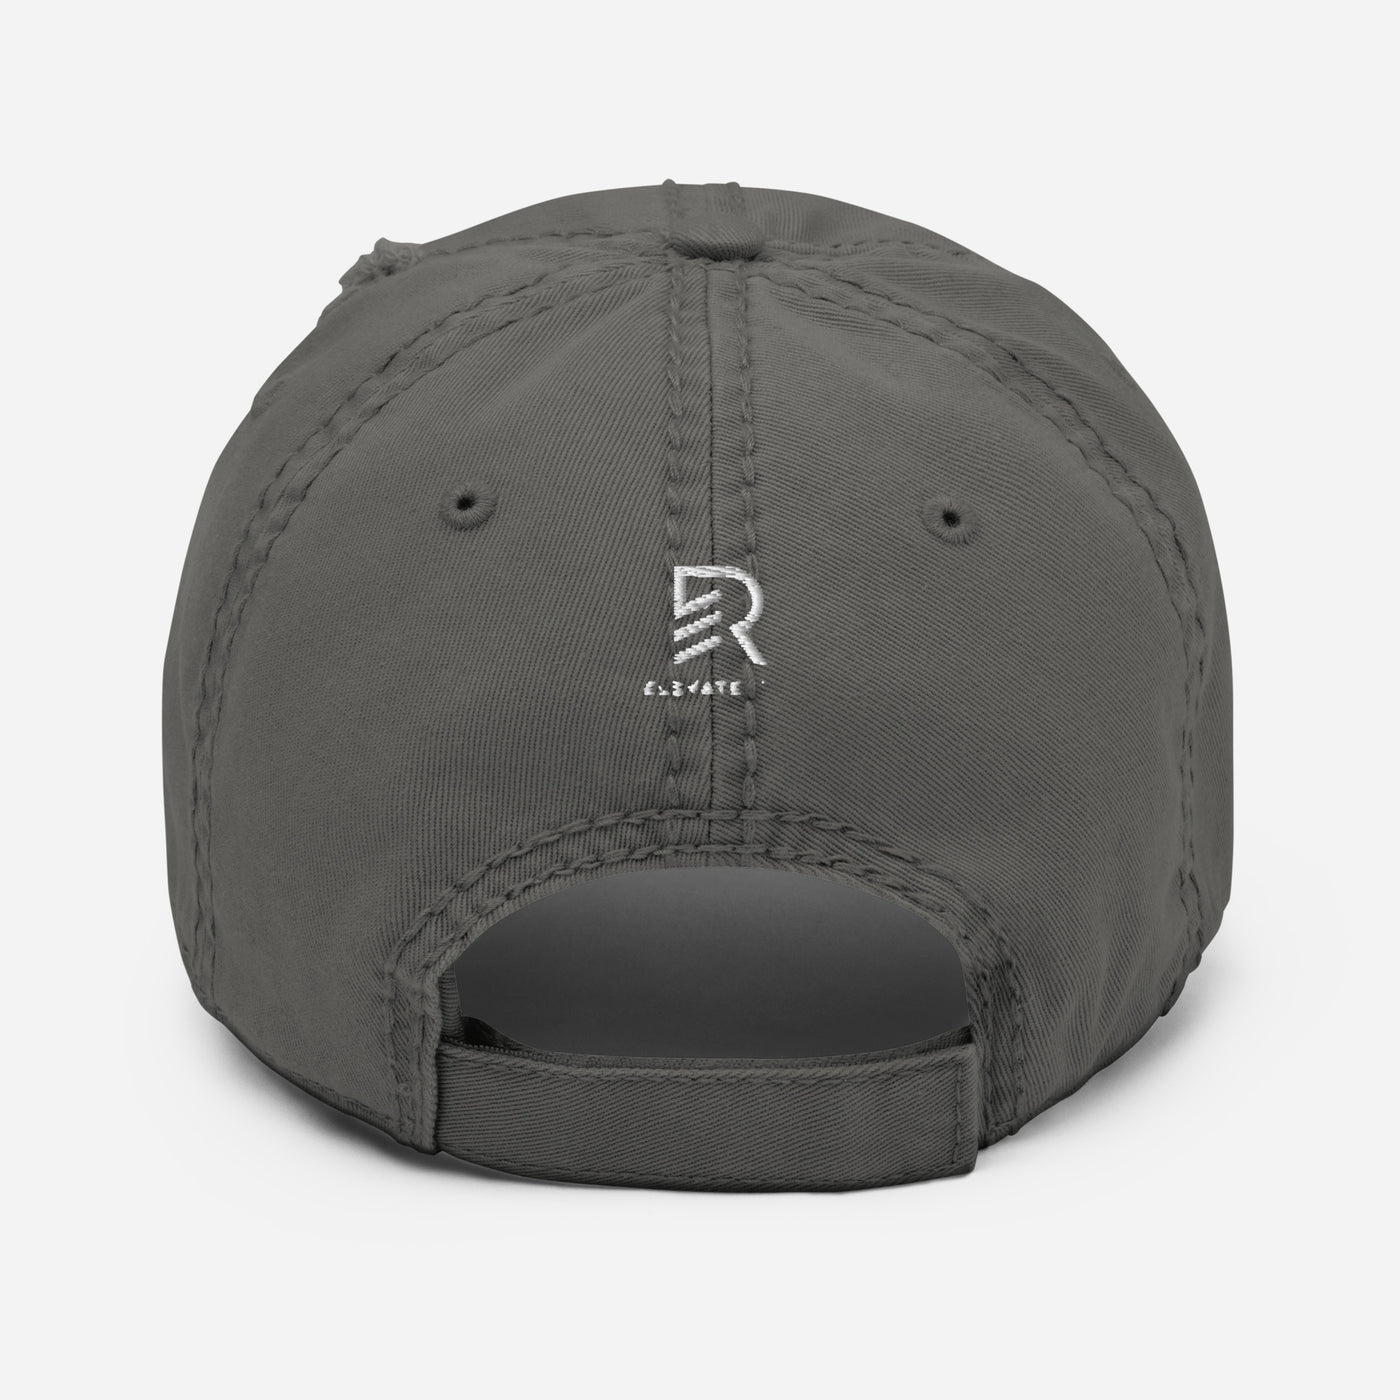 Distressed Charcoal Gray Dad Hat - Unlimited Focused